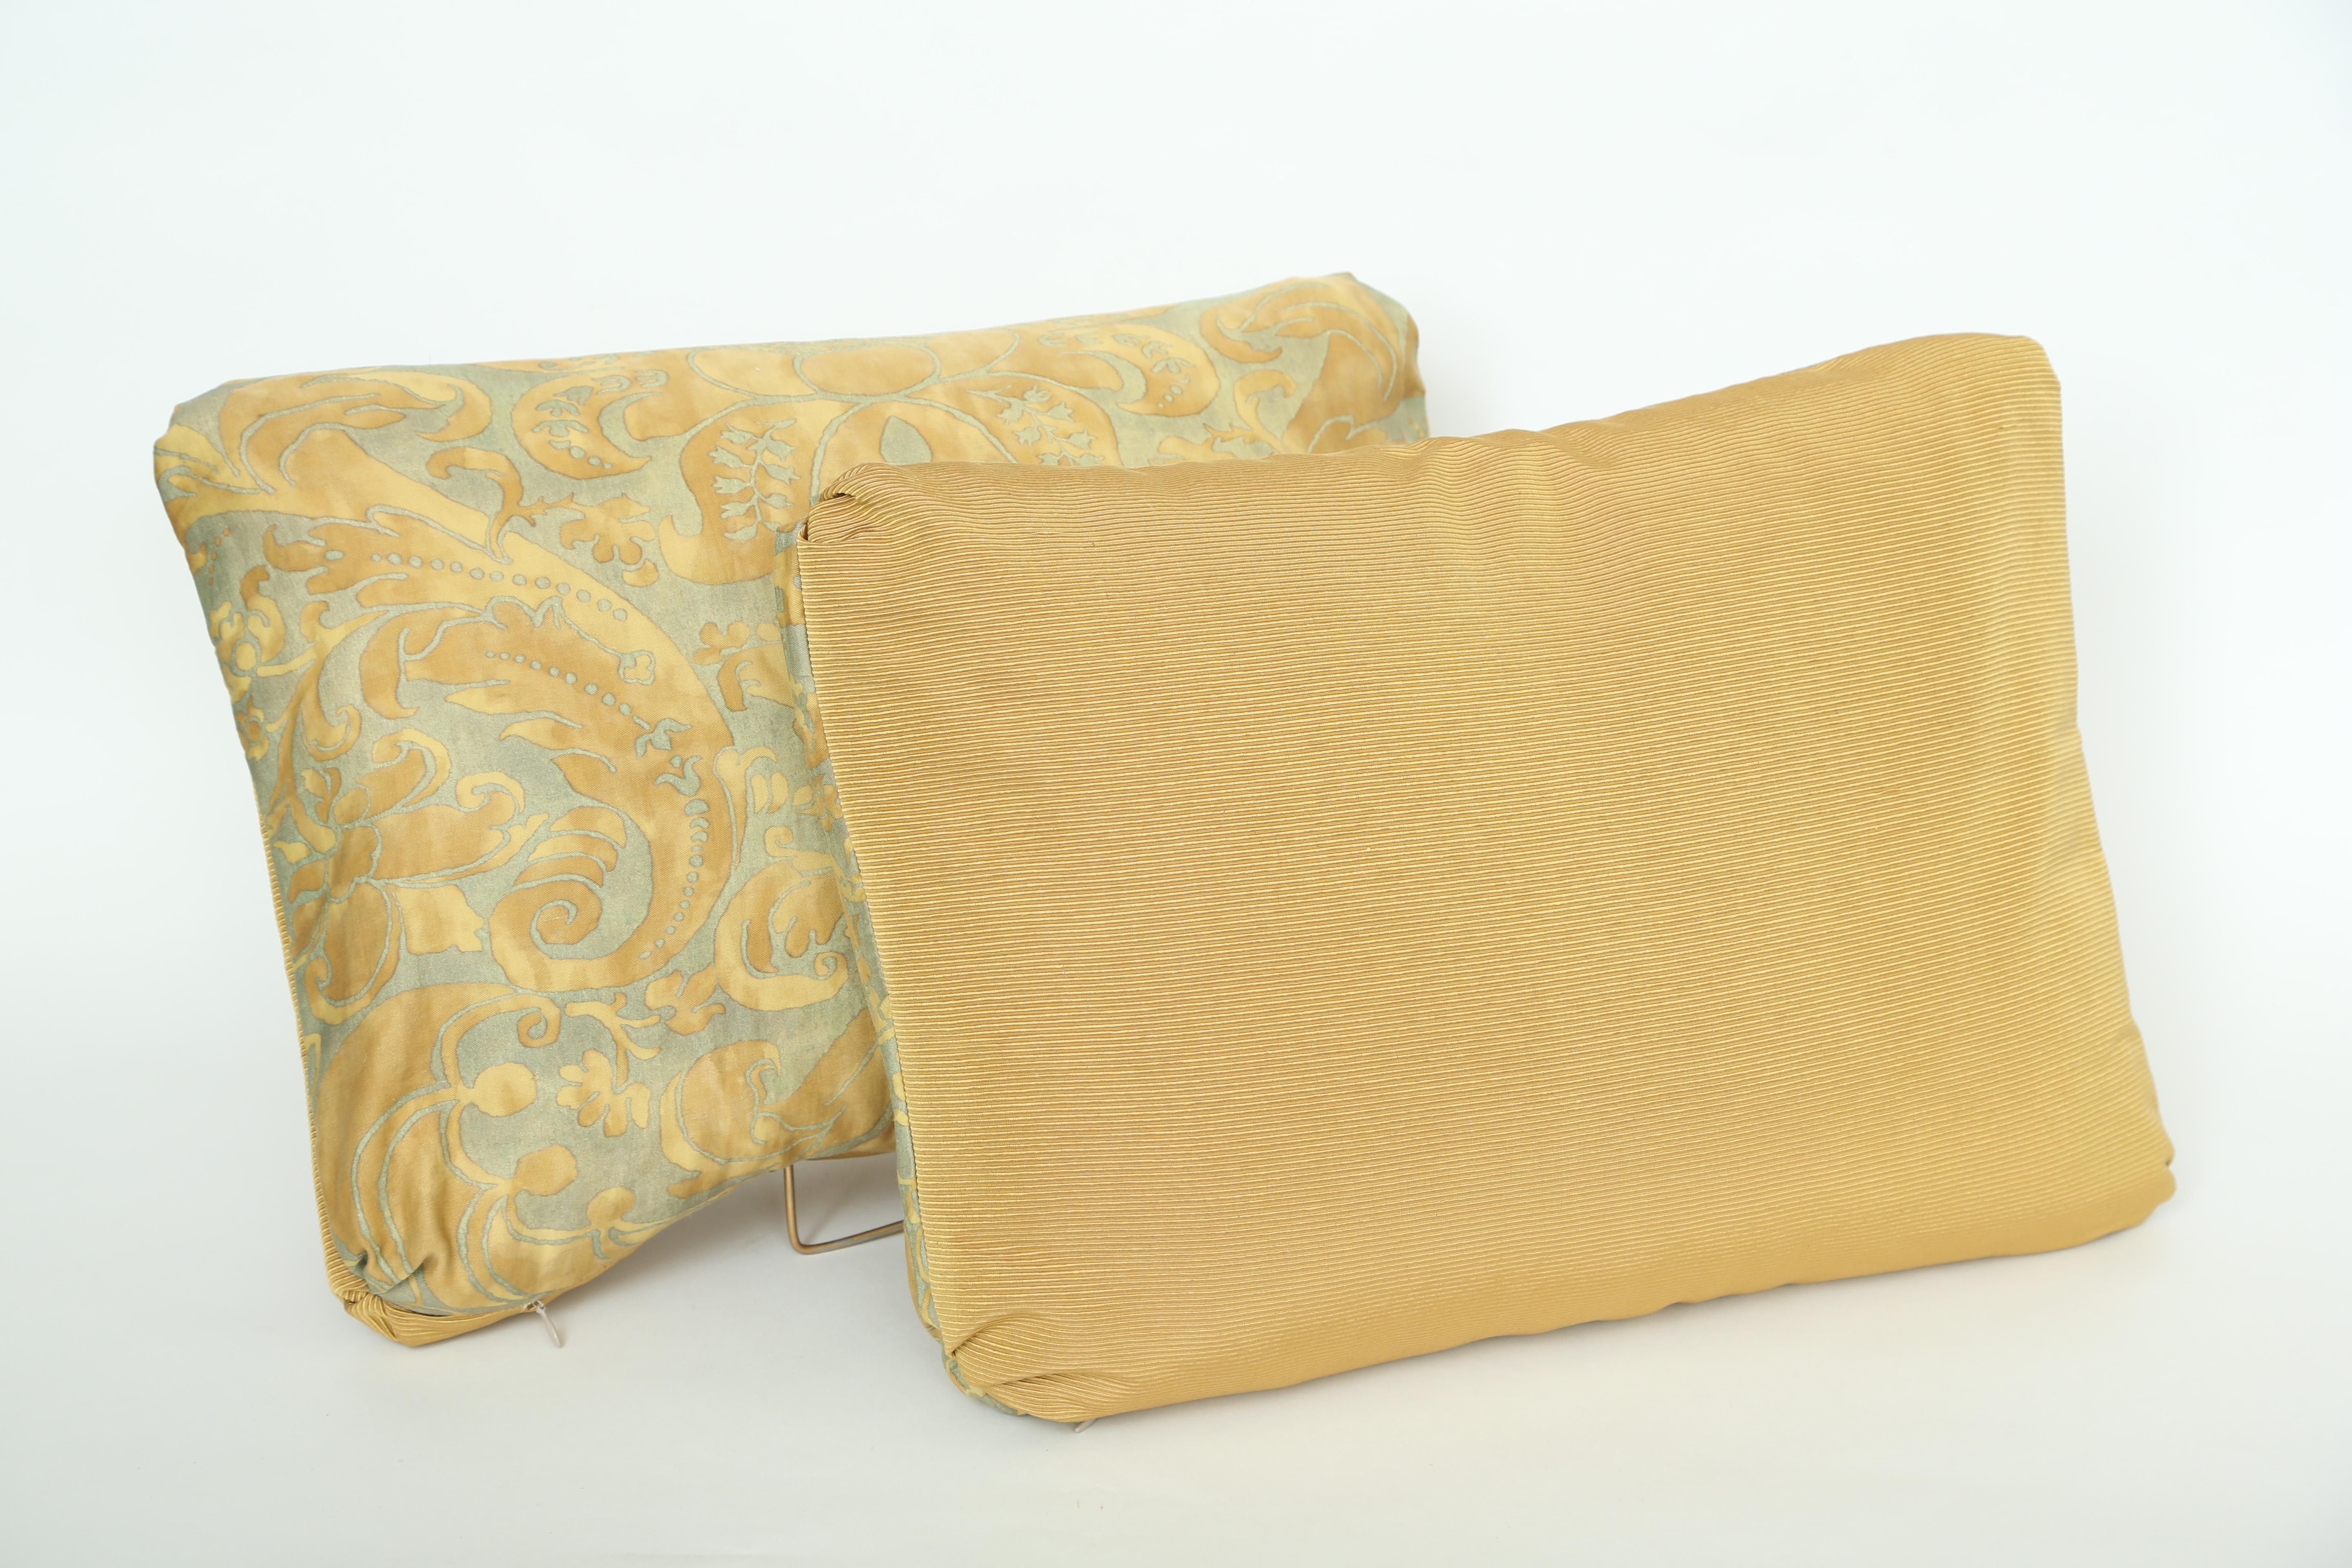 Baroque Revival A Pair of Oblong Fortuny Cushions in the Caravaggio Pattern For Sale